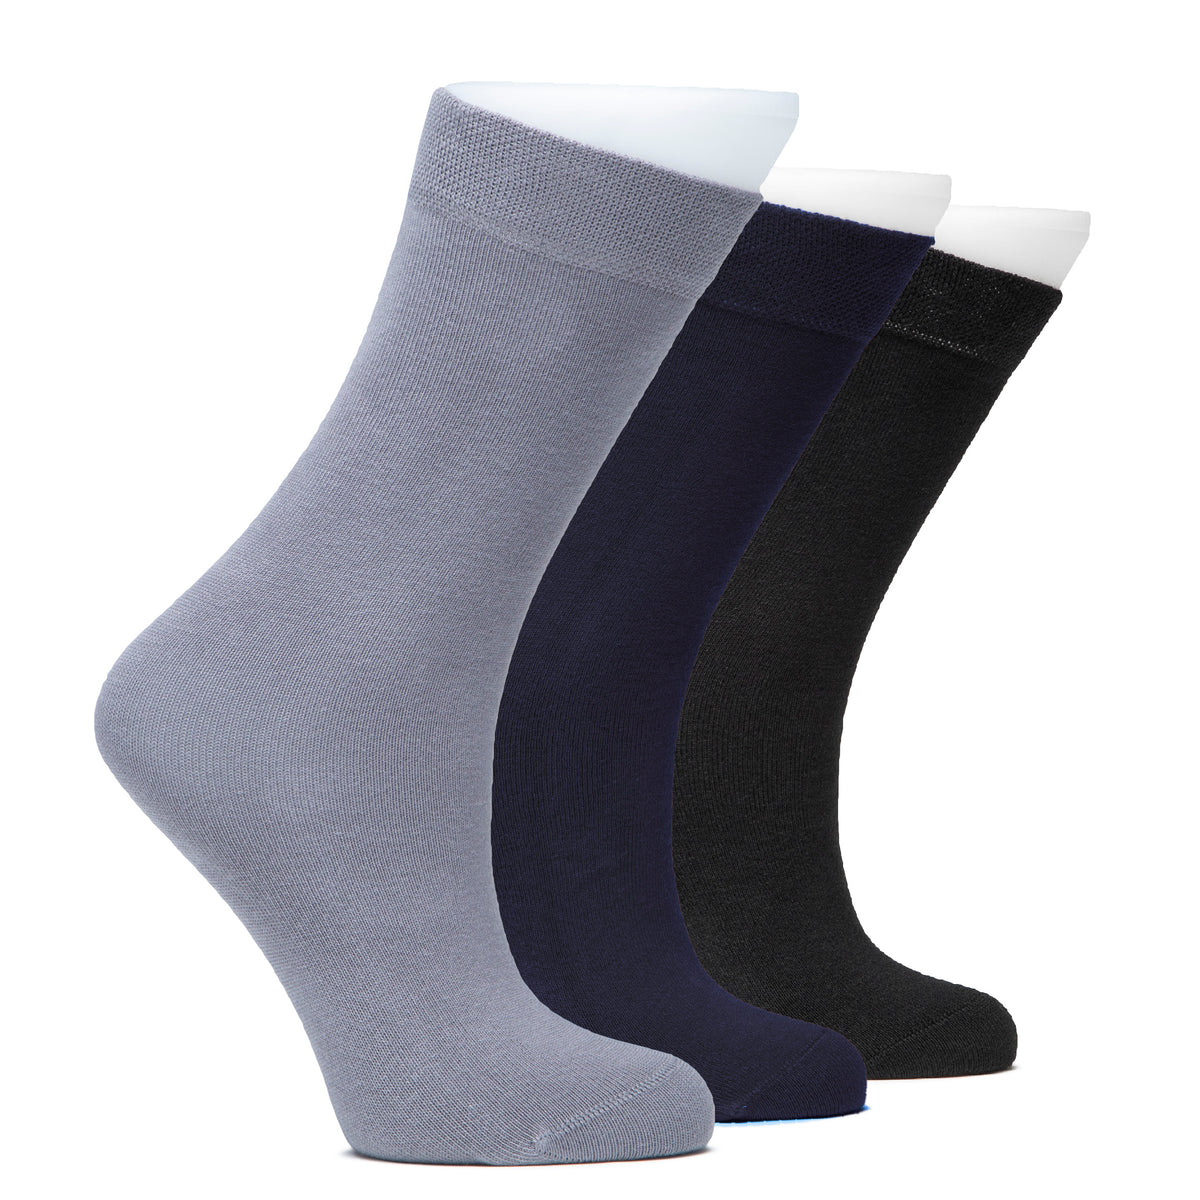 Outstanding Compact Cotton Seamless Toe Plain Color School Socks For Kids, 3 Pairs | 10-14 Years | Grey / Navy Blue / Red